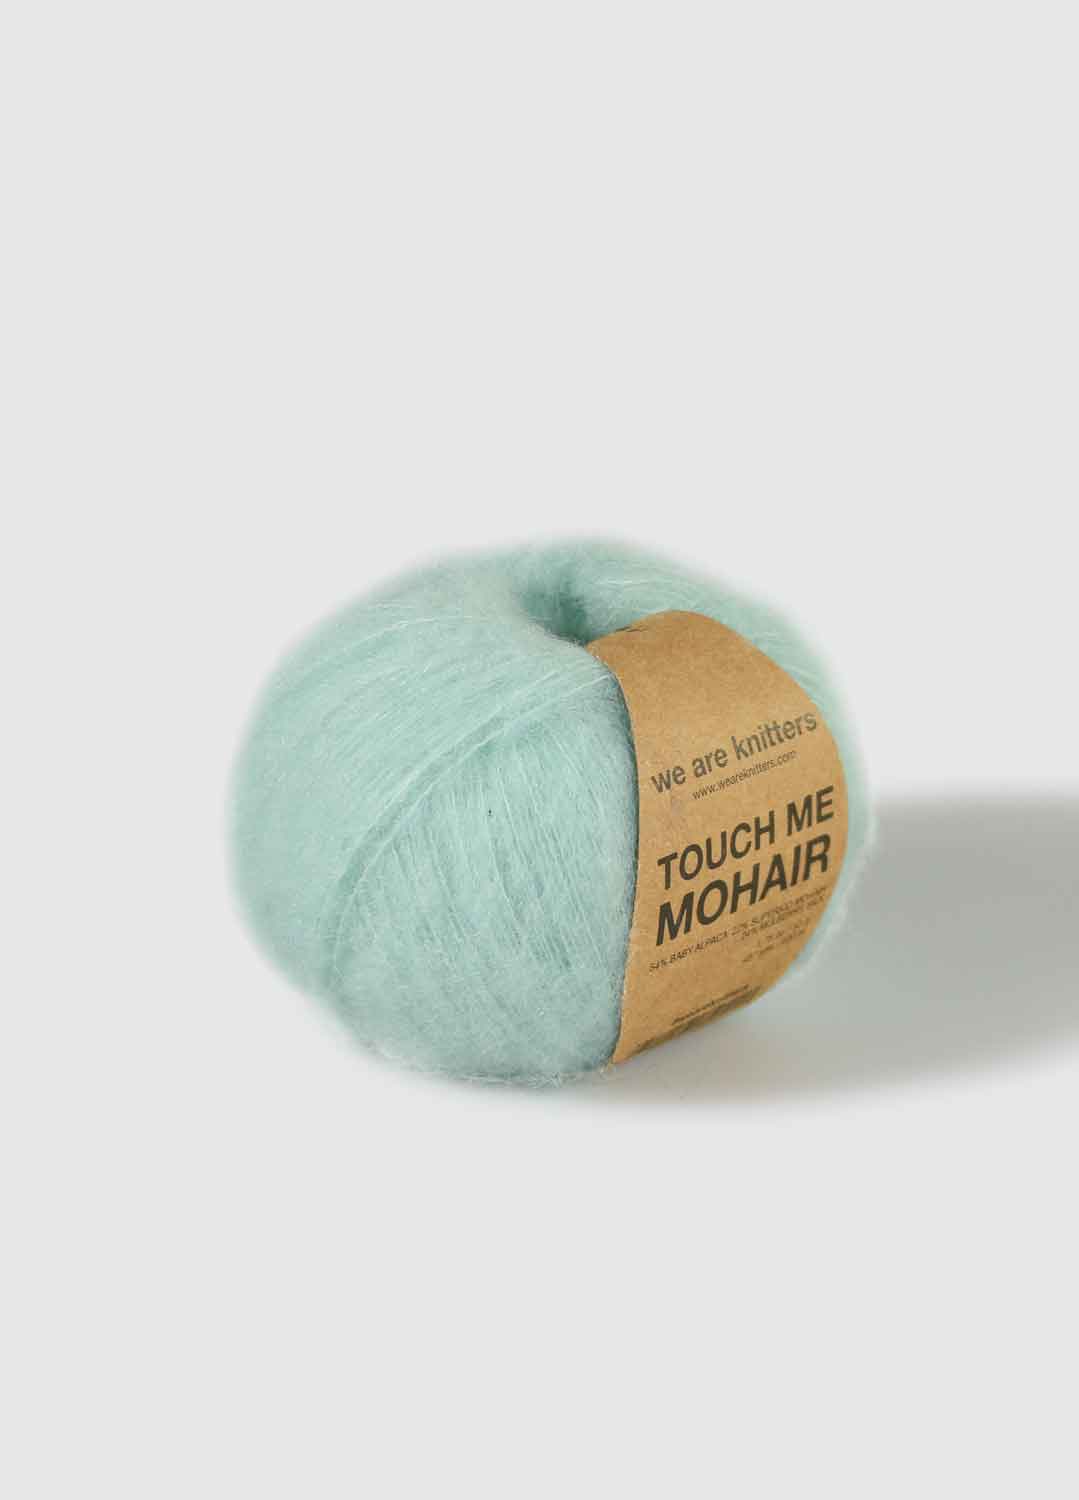 Lang Yarns Mohair Luxe 74 Teal